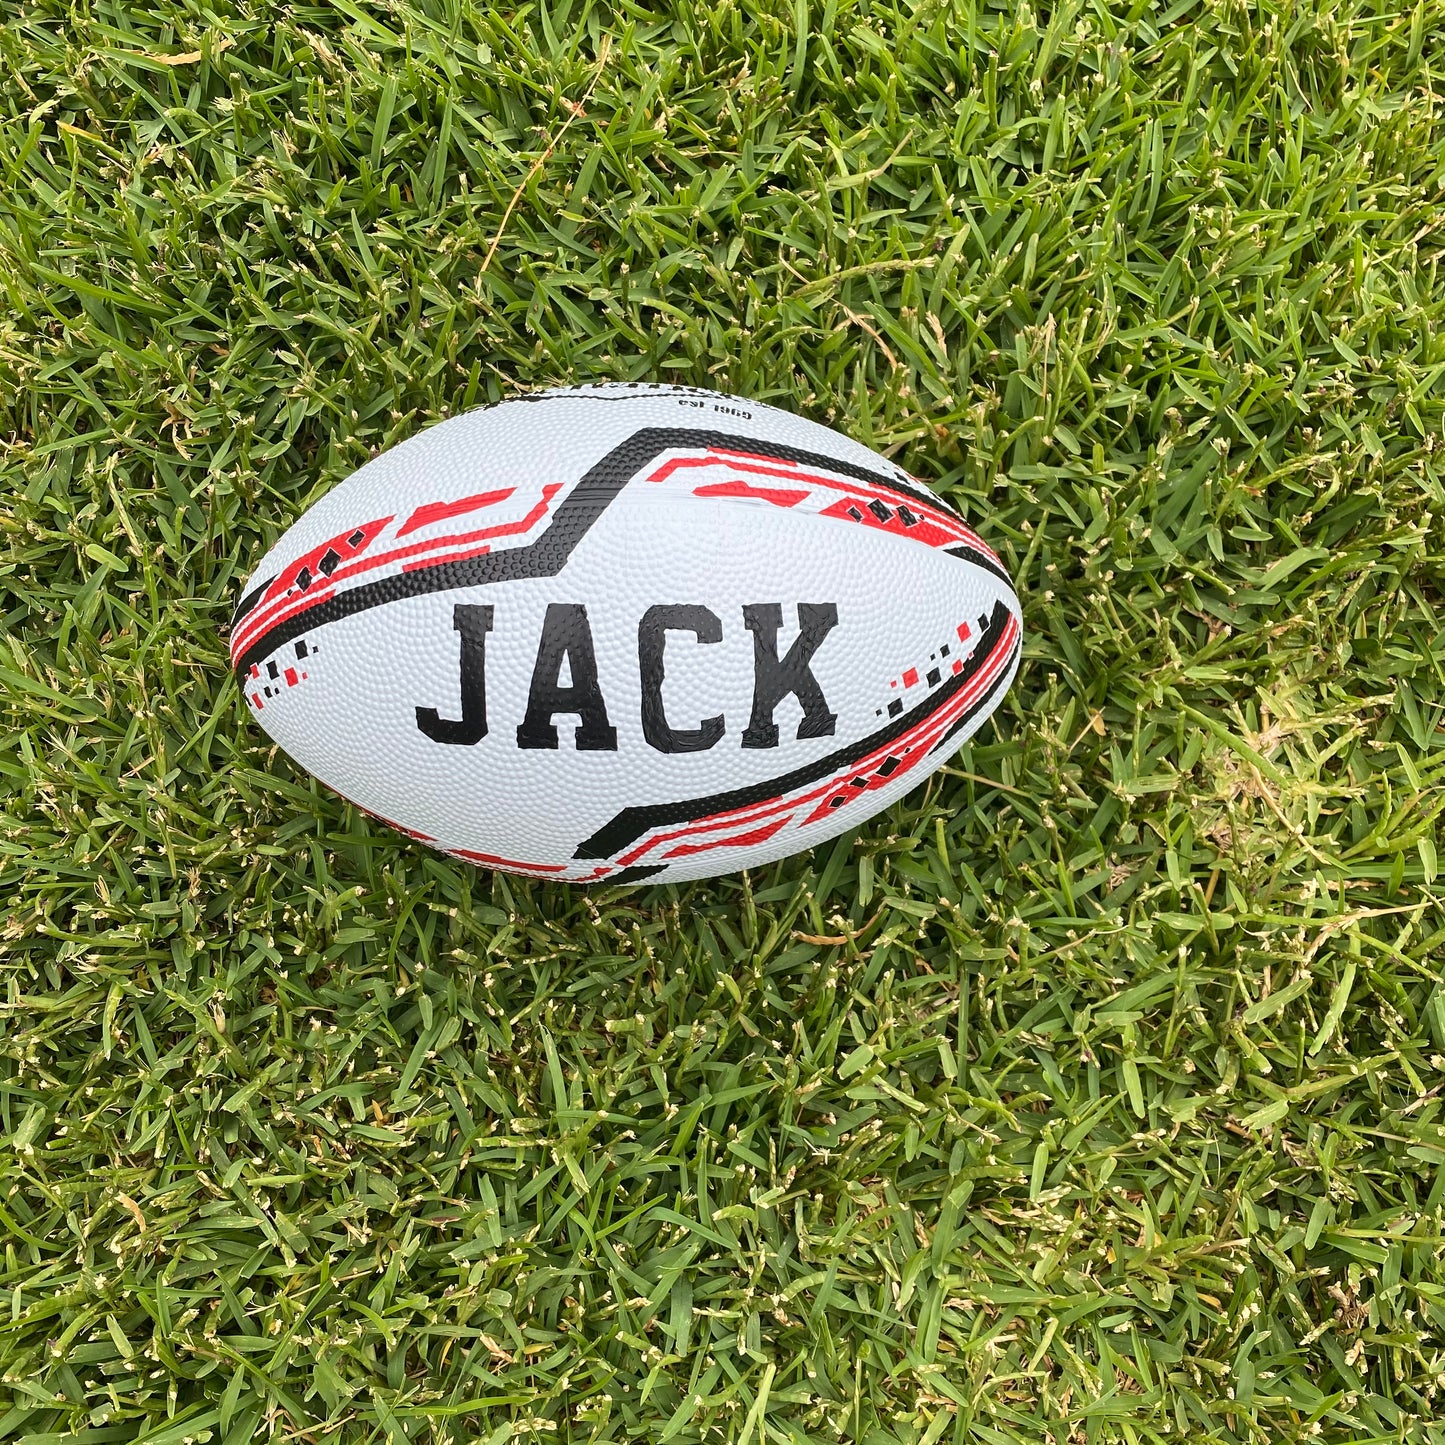 The Personalised Sport Balls